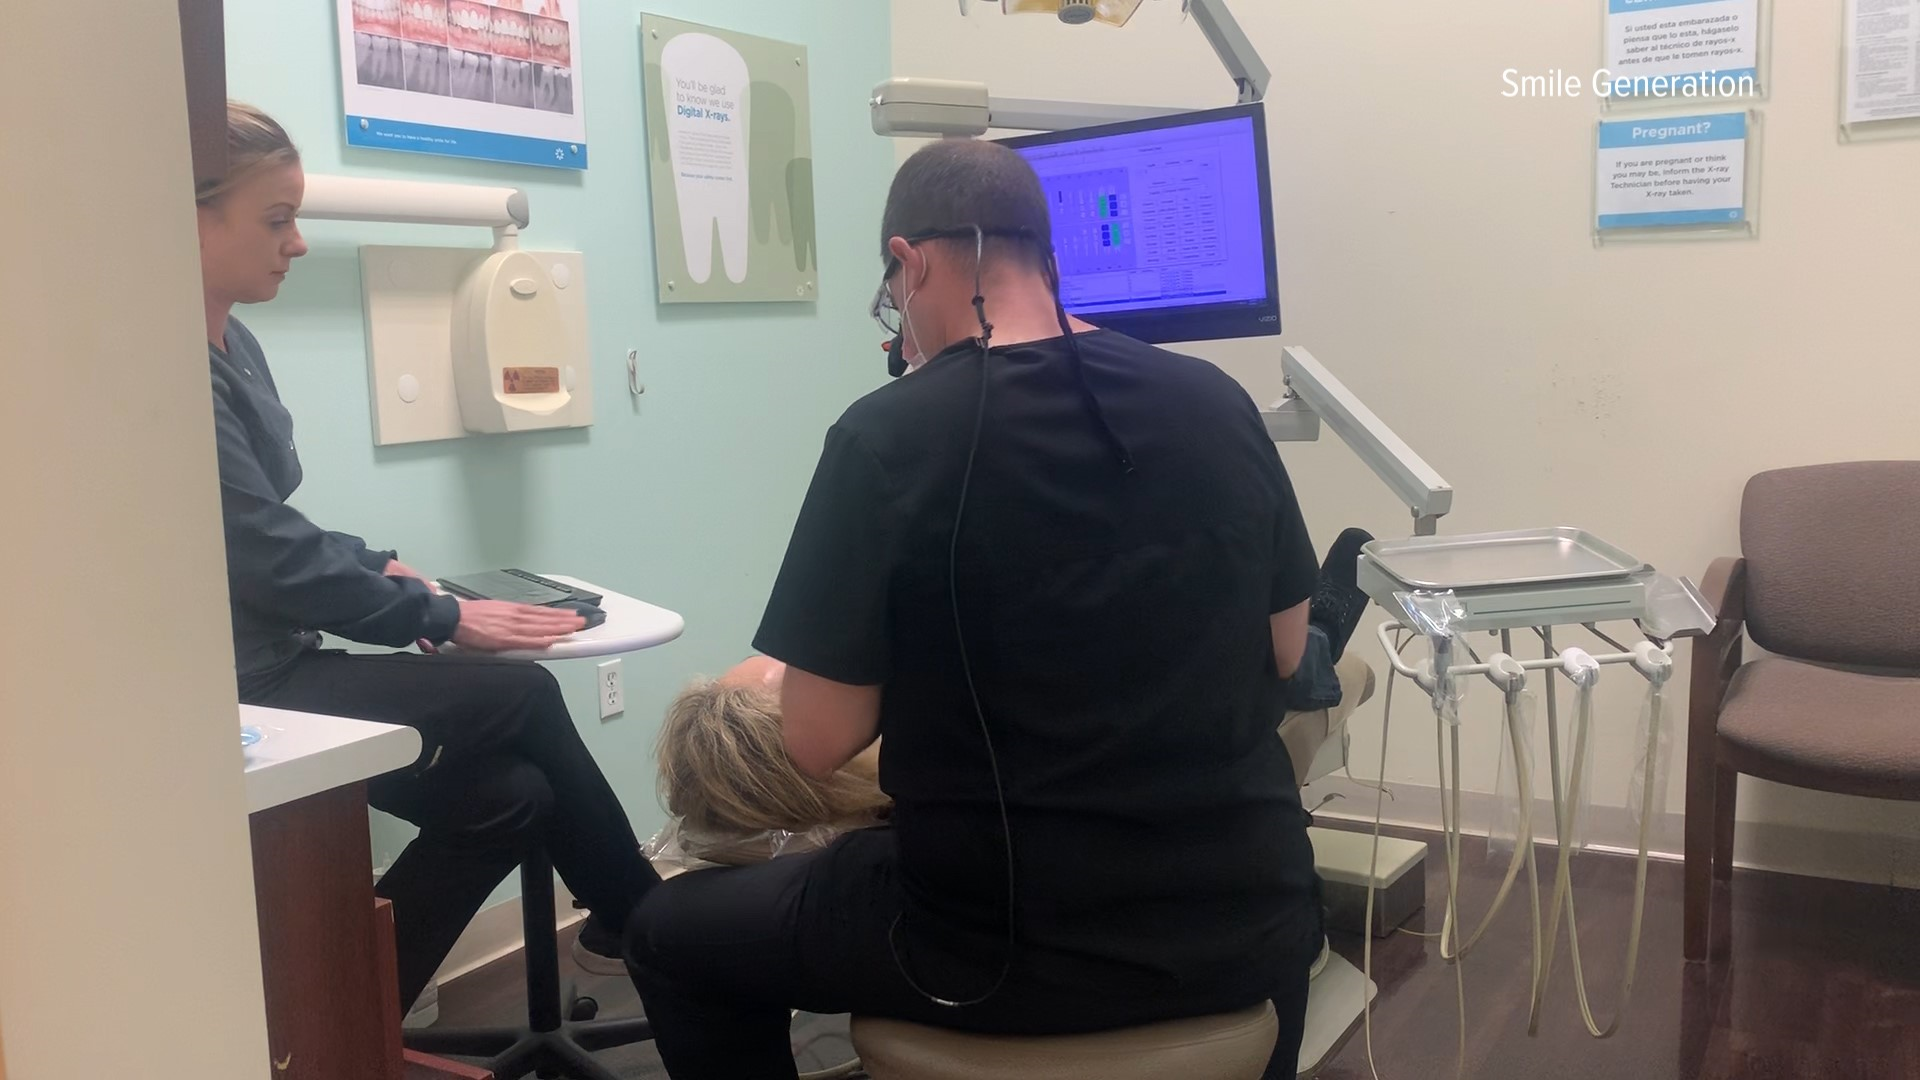 While many dentist offices are closed because of coronavirus, Dr. Ryan O’Donnell is keeping his practice in Folsom open for emergency dental procedures.